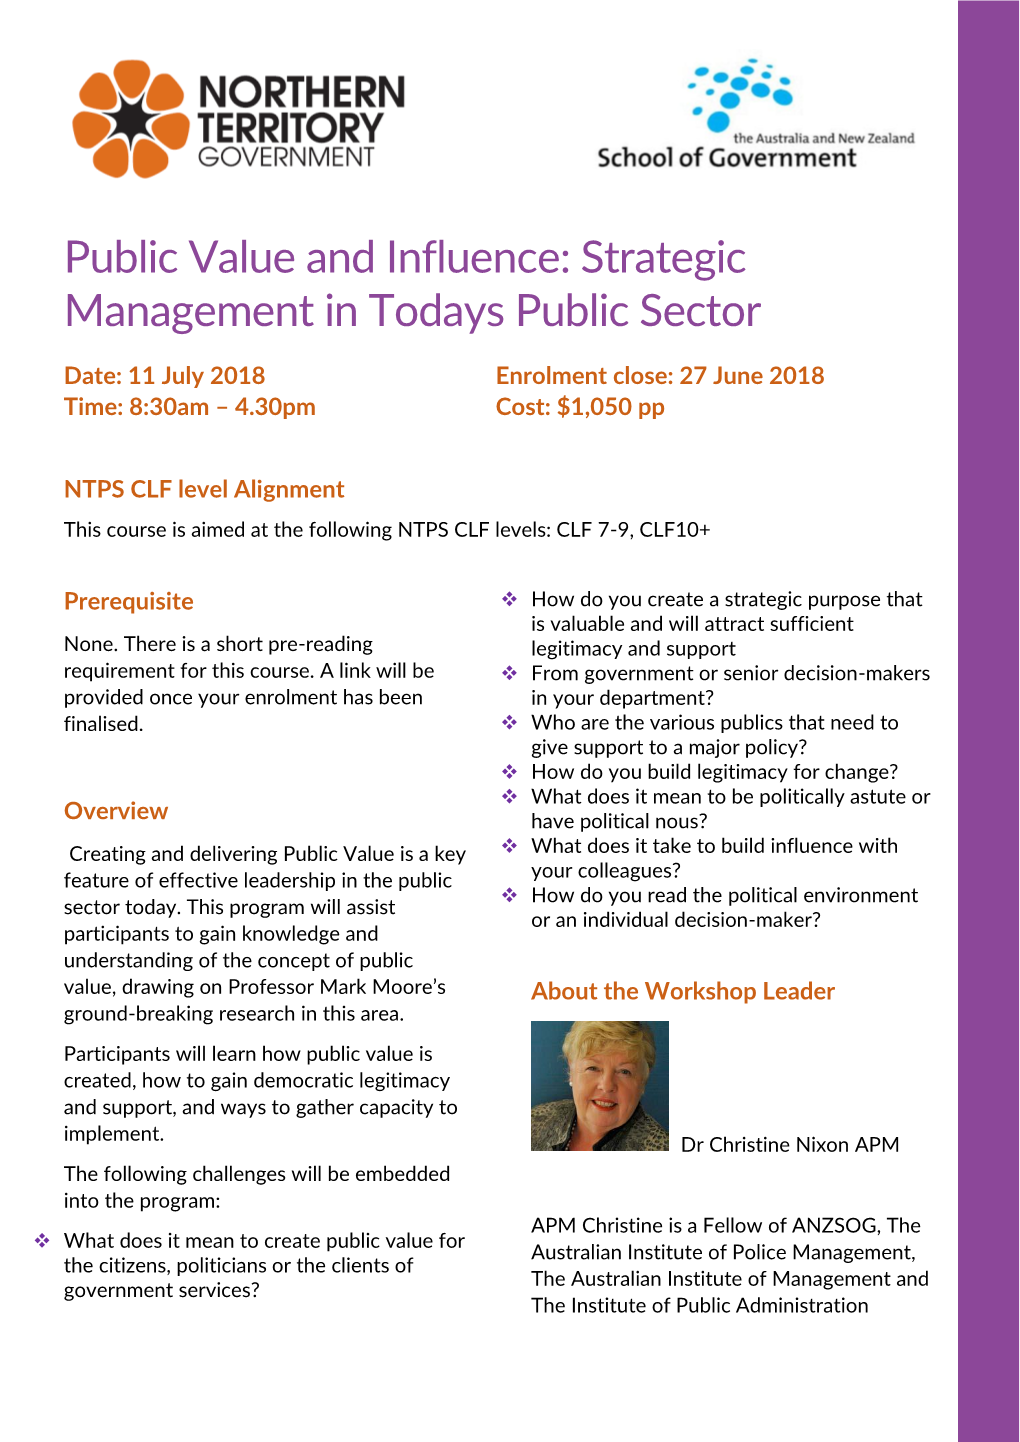 Public Value and Influence: Strategic Management in Todays Public Sector